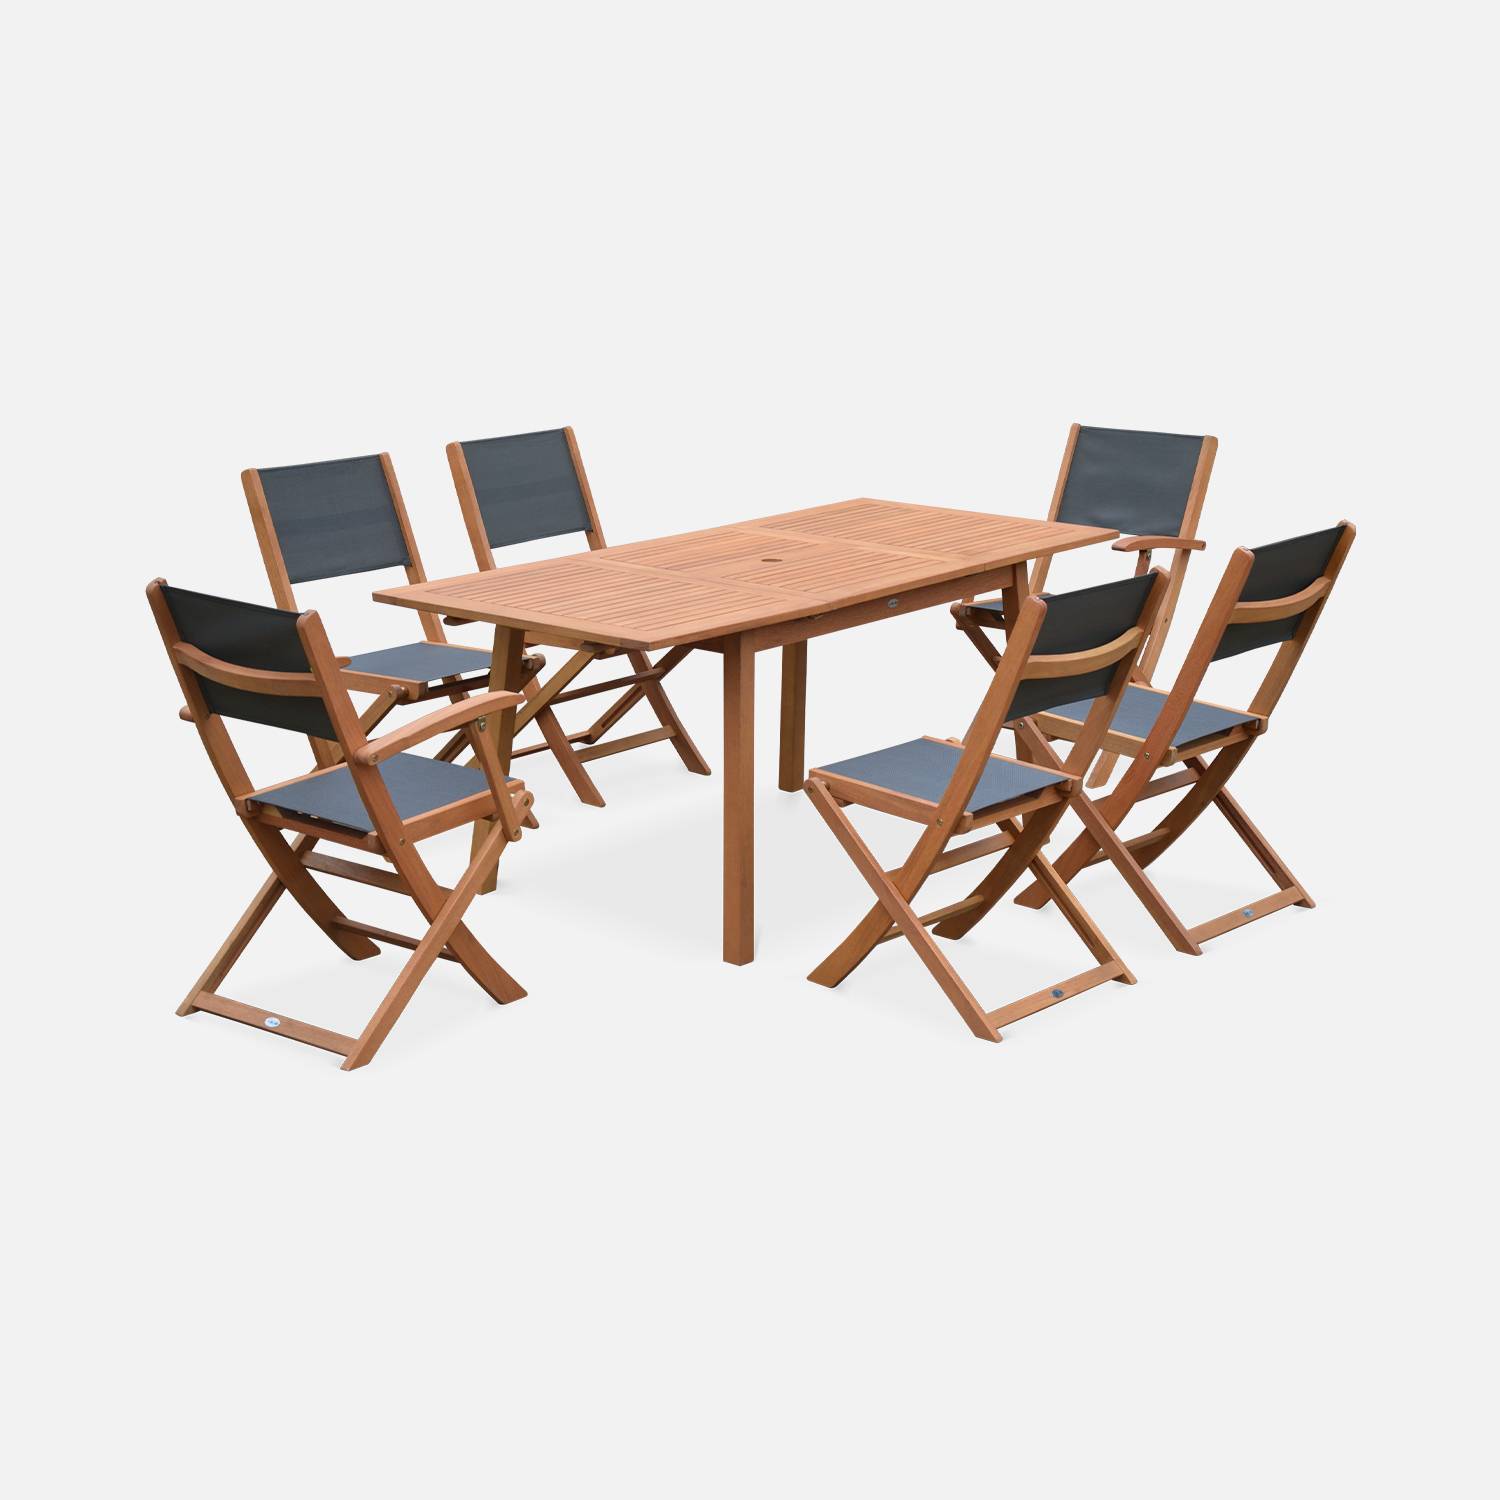 6-seater garden dining set, extendable 120-180cm FSC-eucalyptus wooden table, 4 chairs and 2 armchairs - Almeria 6 - Anthracite textilene seats Photo3